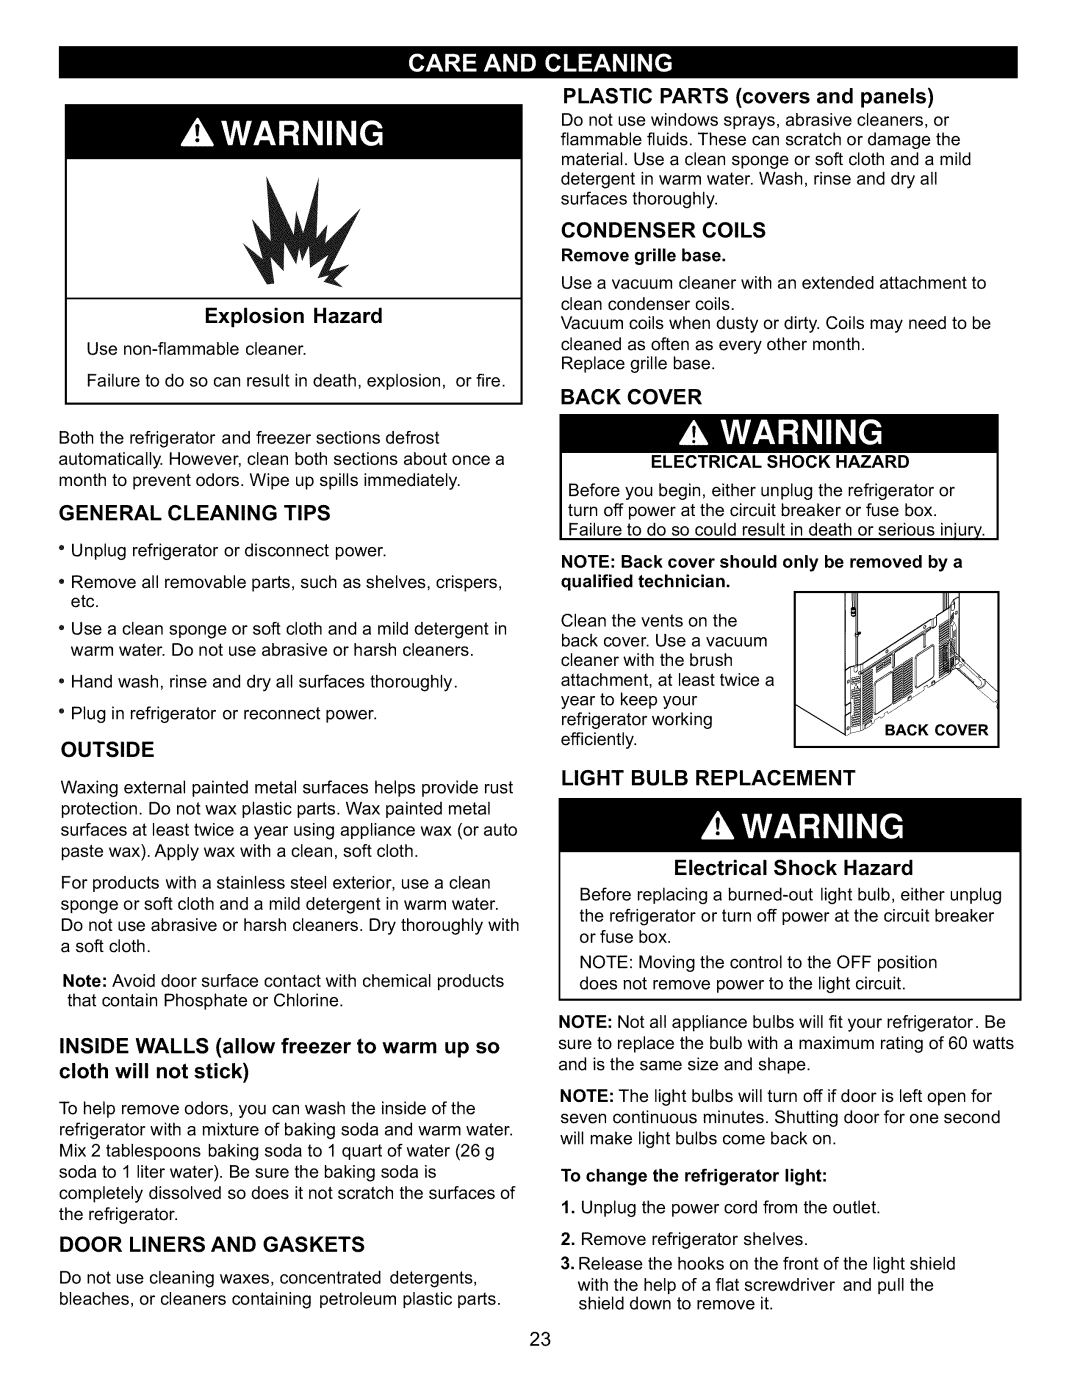 Kenmore 795.7130-K Explosion Hazard, General Cleaning Tips, Outside, INSIDE WALLS allow freezer to warm up so, Back Cover 